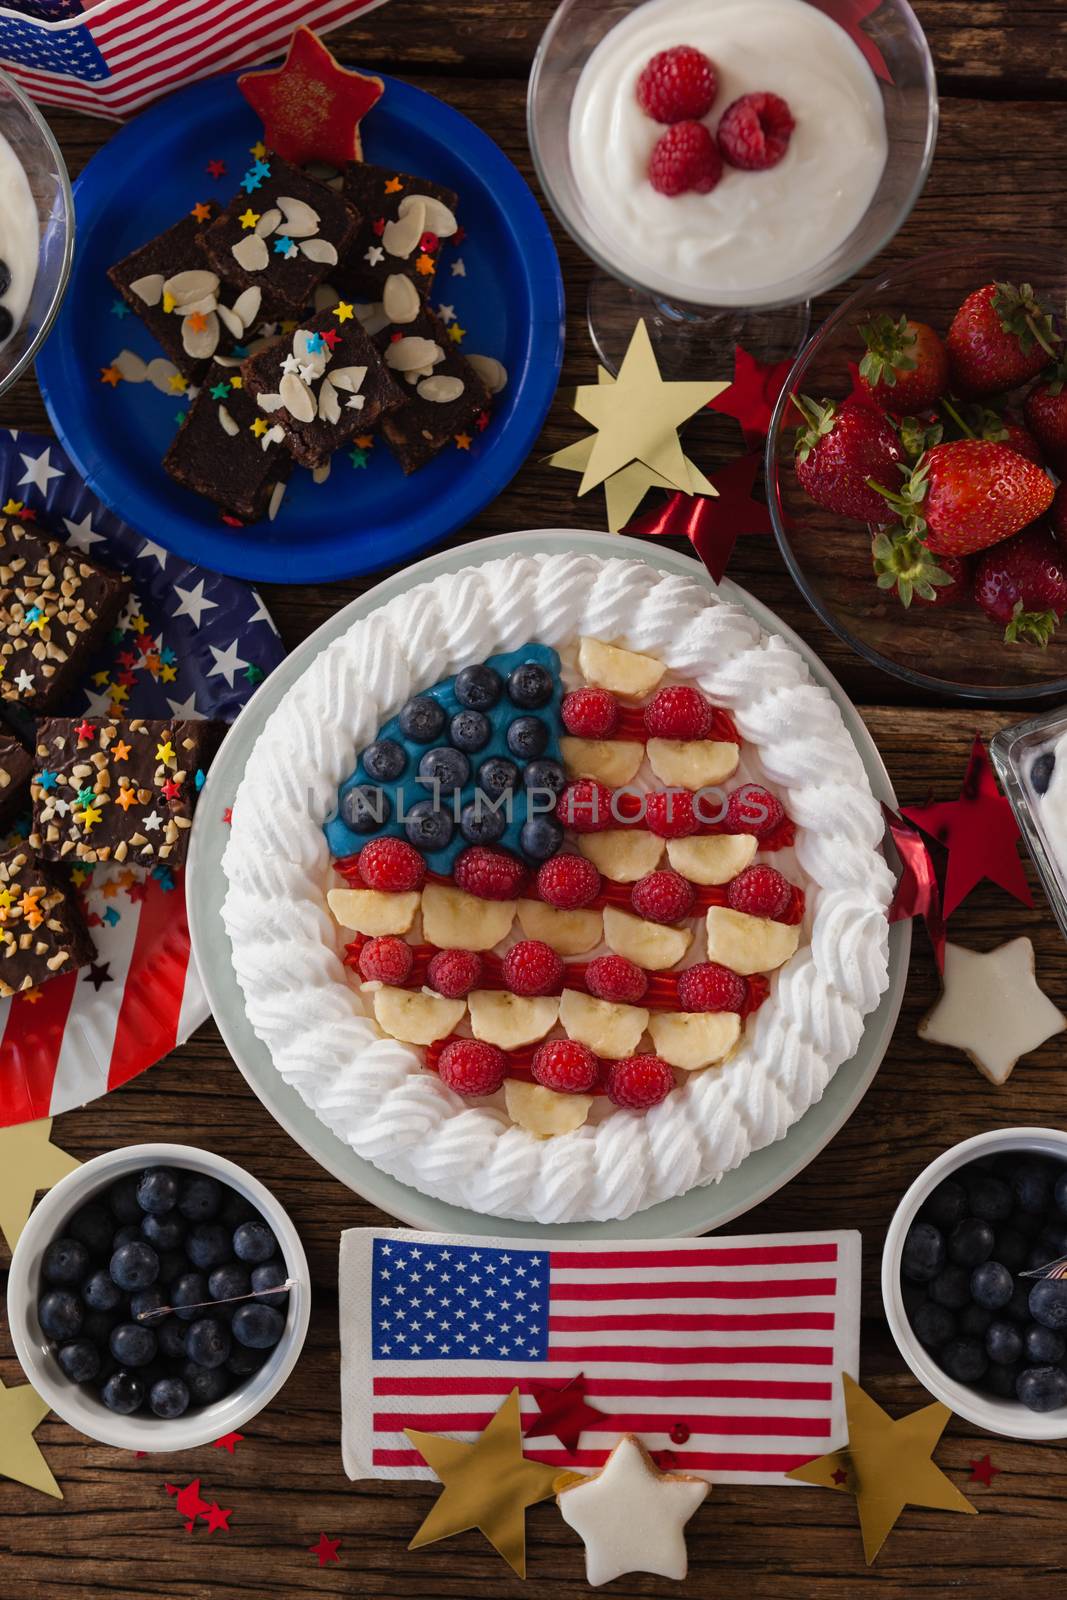 Fruitcake and various sweet foods arranged on wooden table by Wavebreakmedia